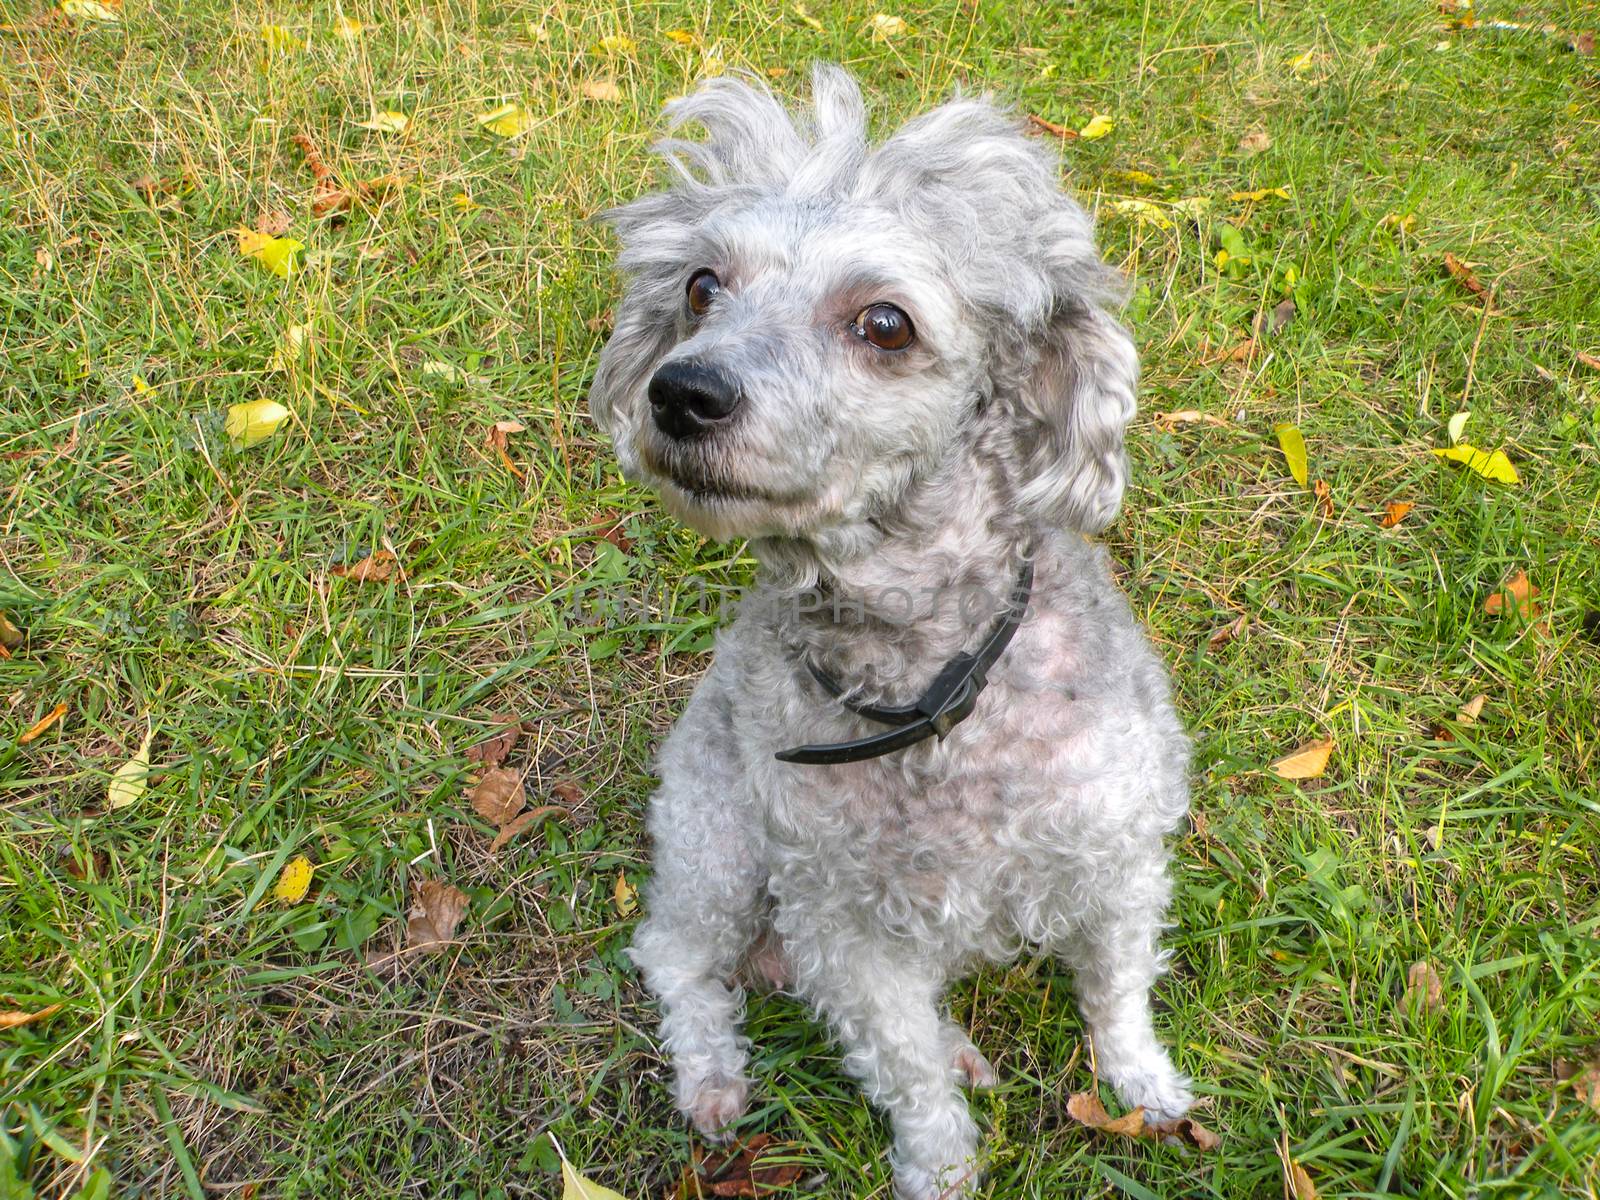 Funny dog with short hair in a collar sitting on the grass and playfully posing